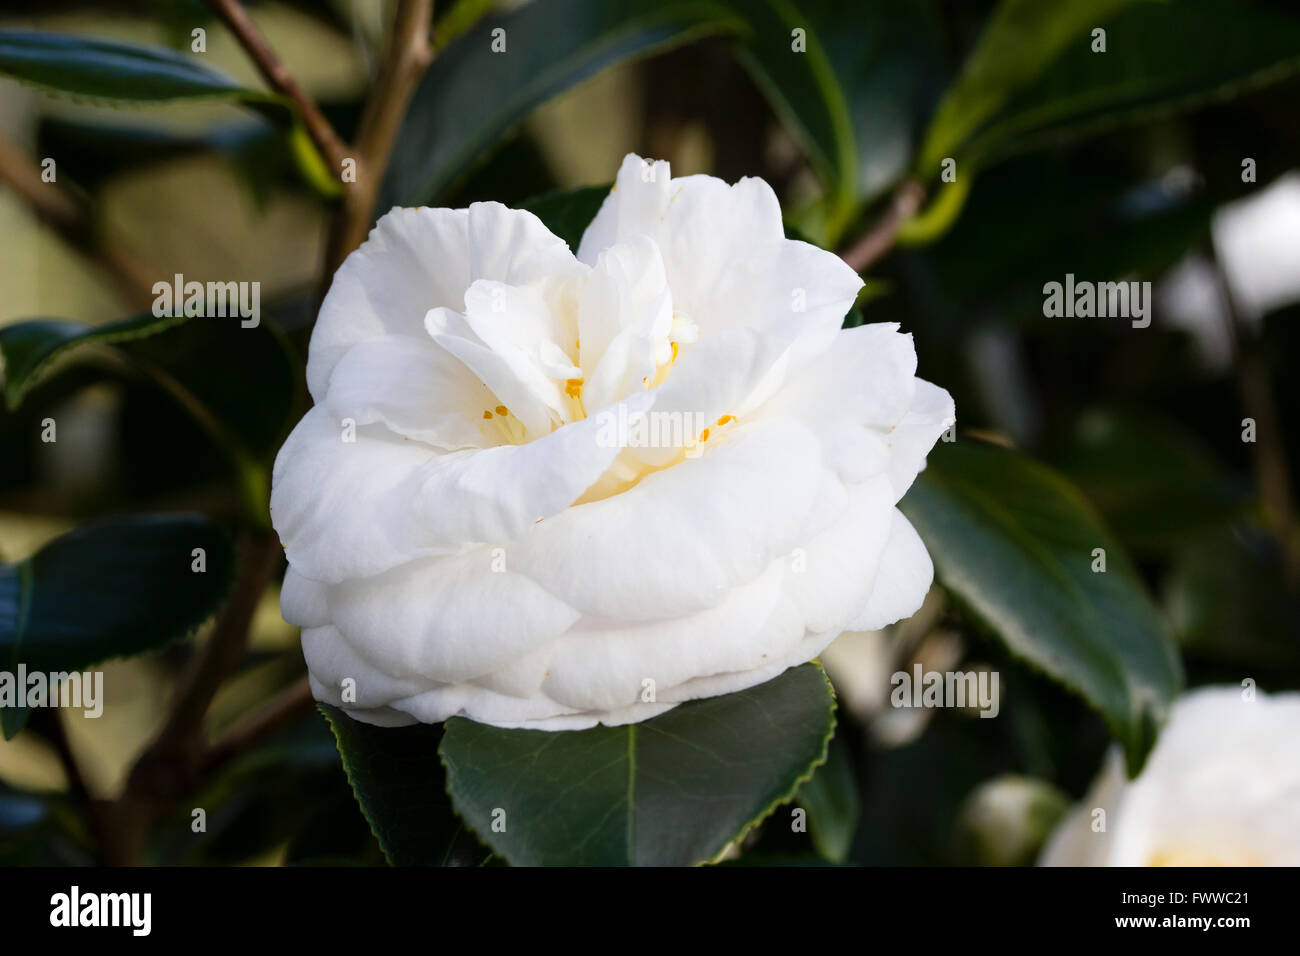 Double white flowers of the late winter blooming evergreen shrub, Camellia japonica 'Elizabeth Dowd' Stock Photo